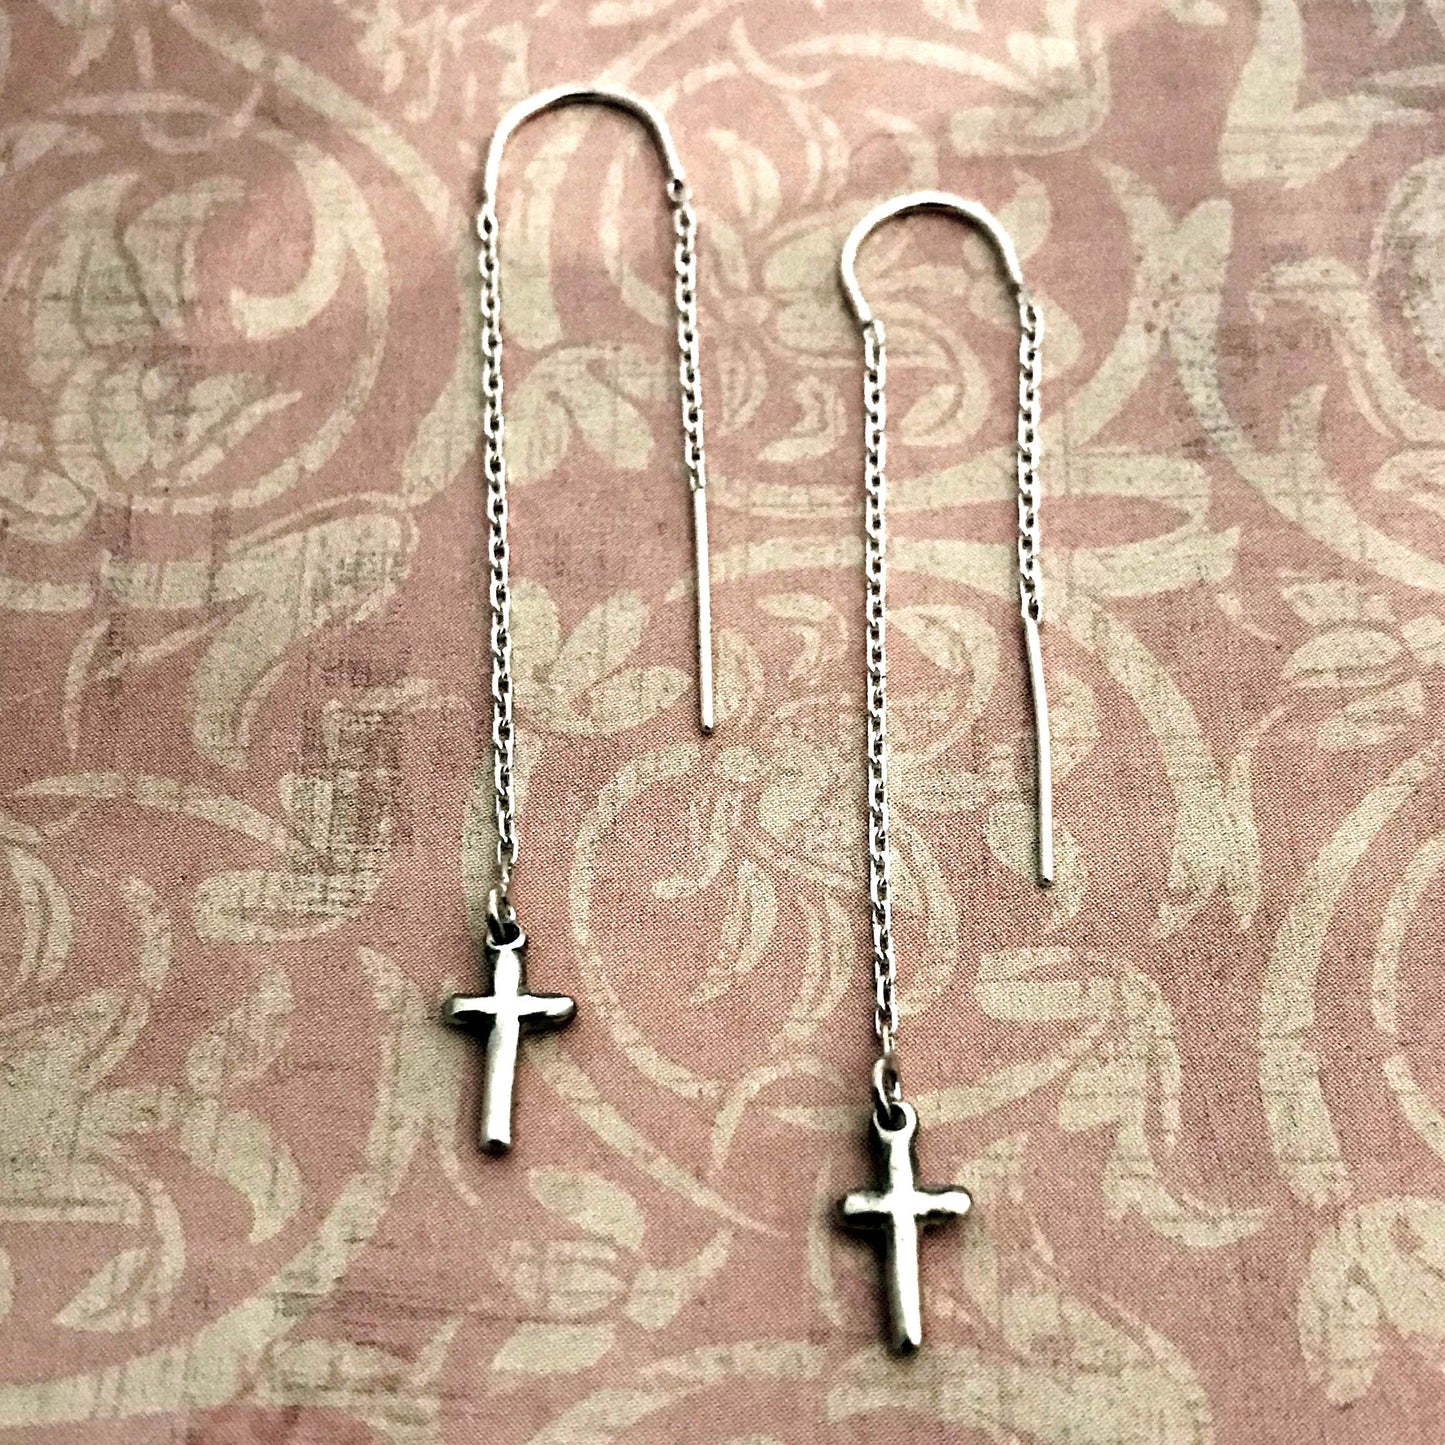 Tiny Crosses - Sterling silver Earrings on French posts or Ear threaders